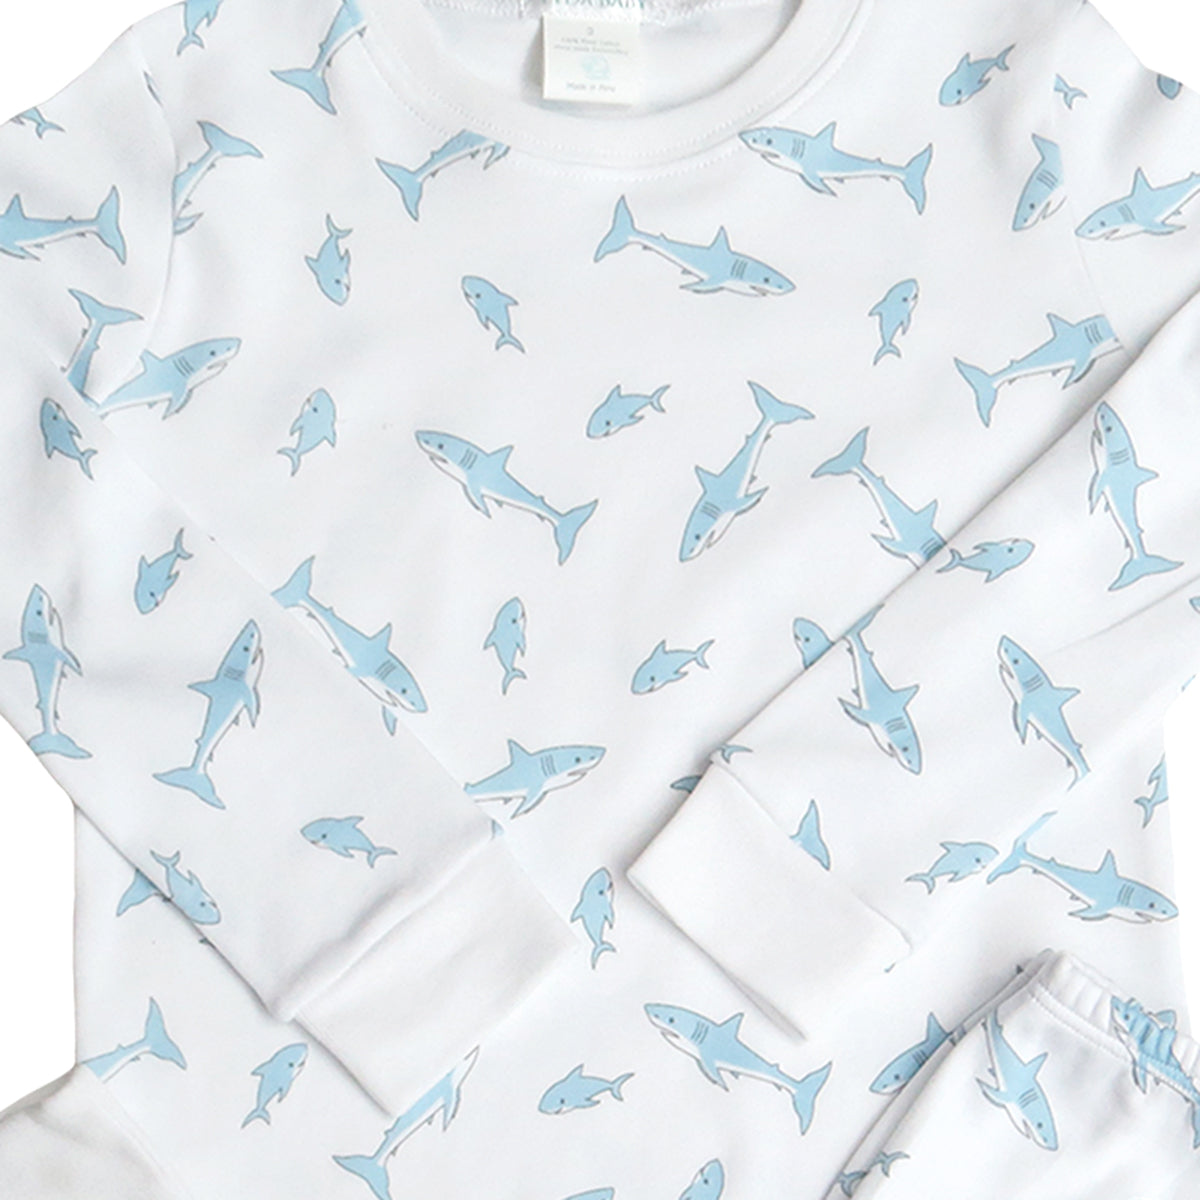 Close-up detail of a white pima cotton pajama shirt with blue shark patterns on it